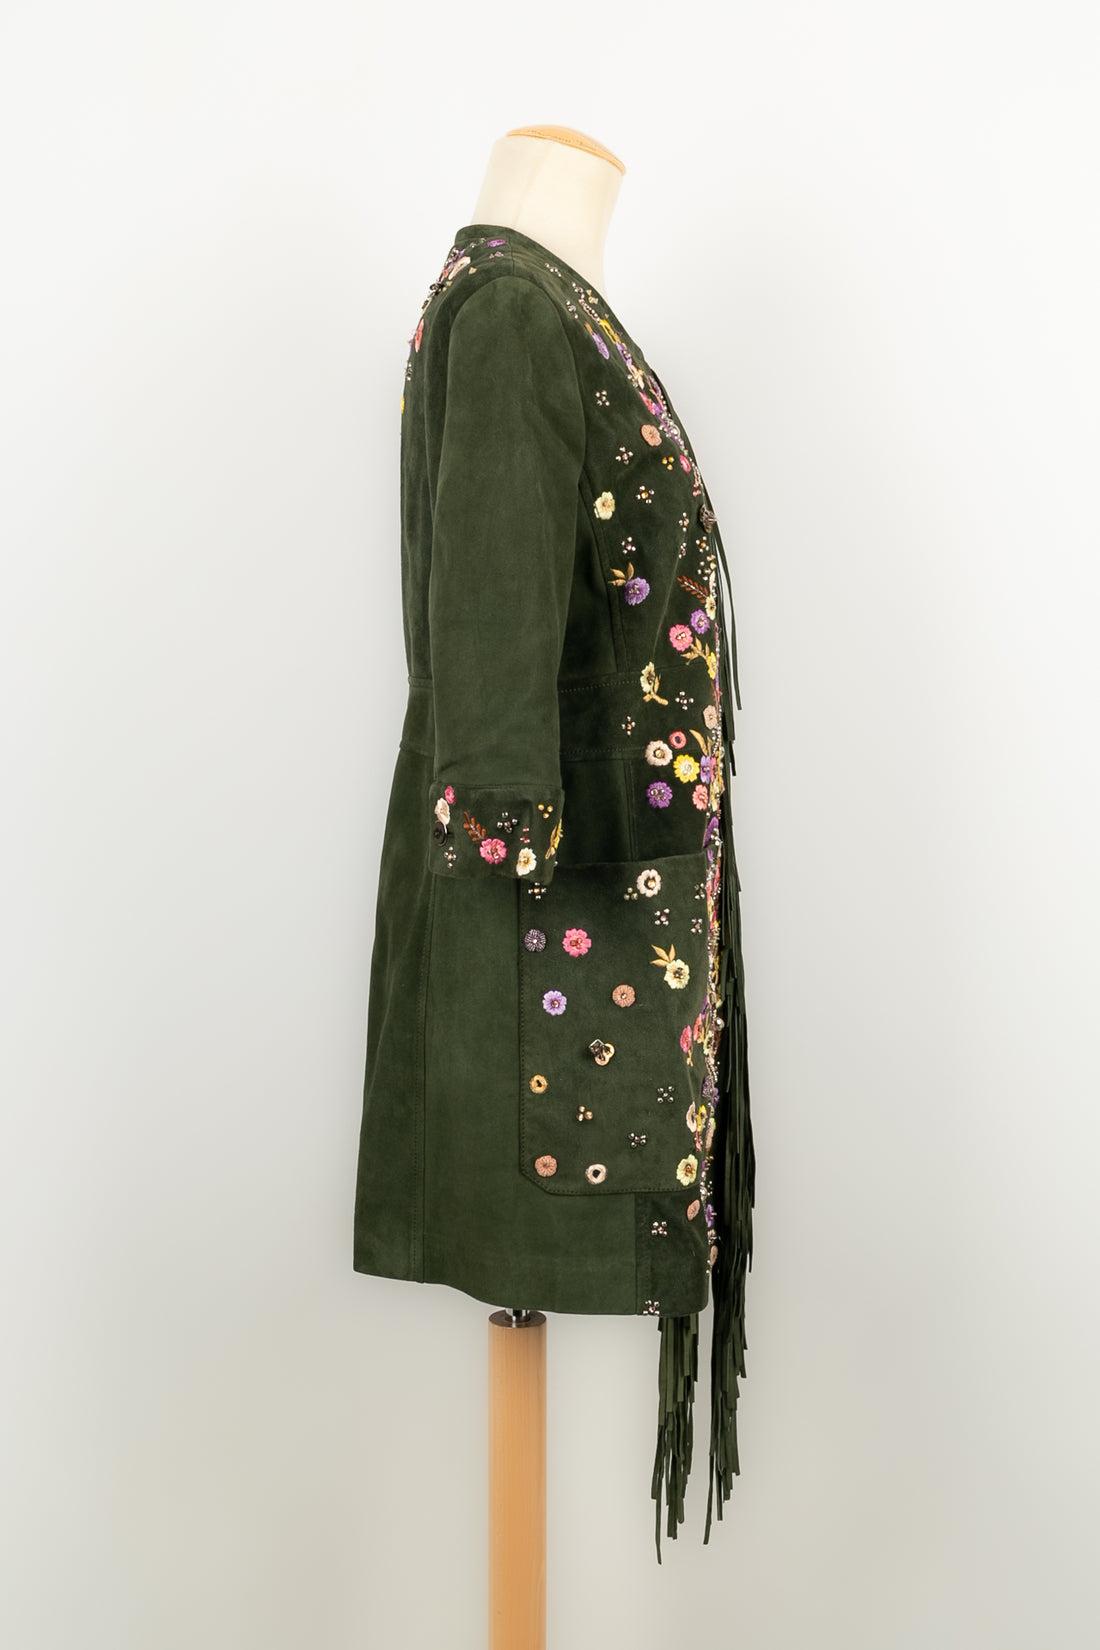 Pucci Embroidered Lamb Leather Coat Size 38FR, 2015 For Sale 1